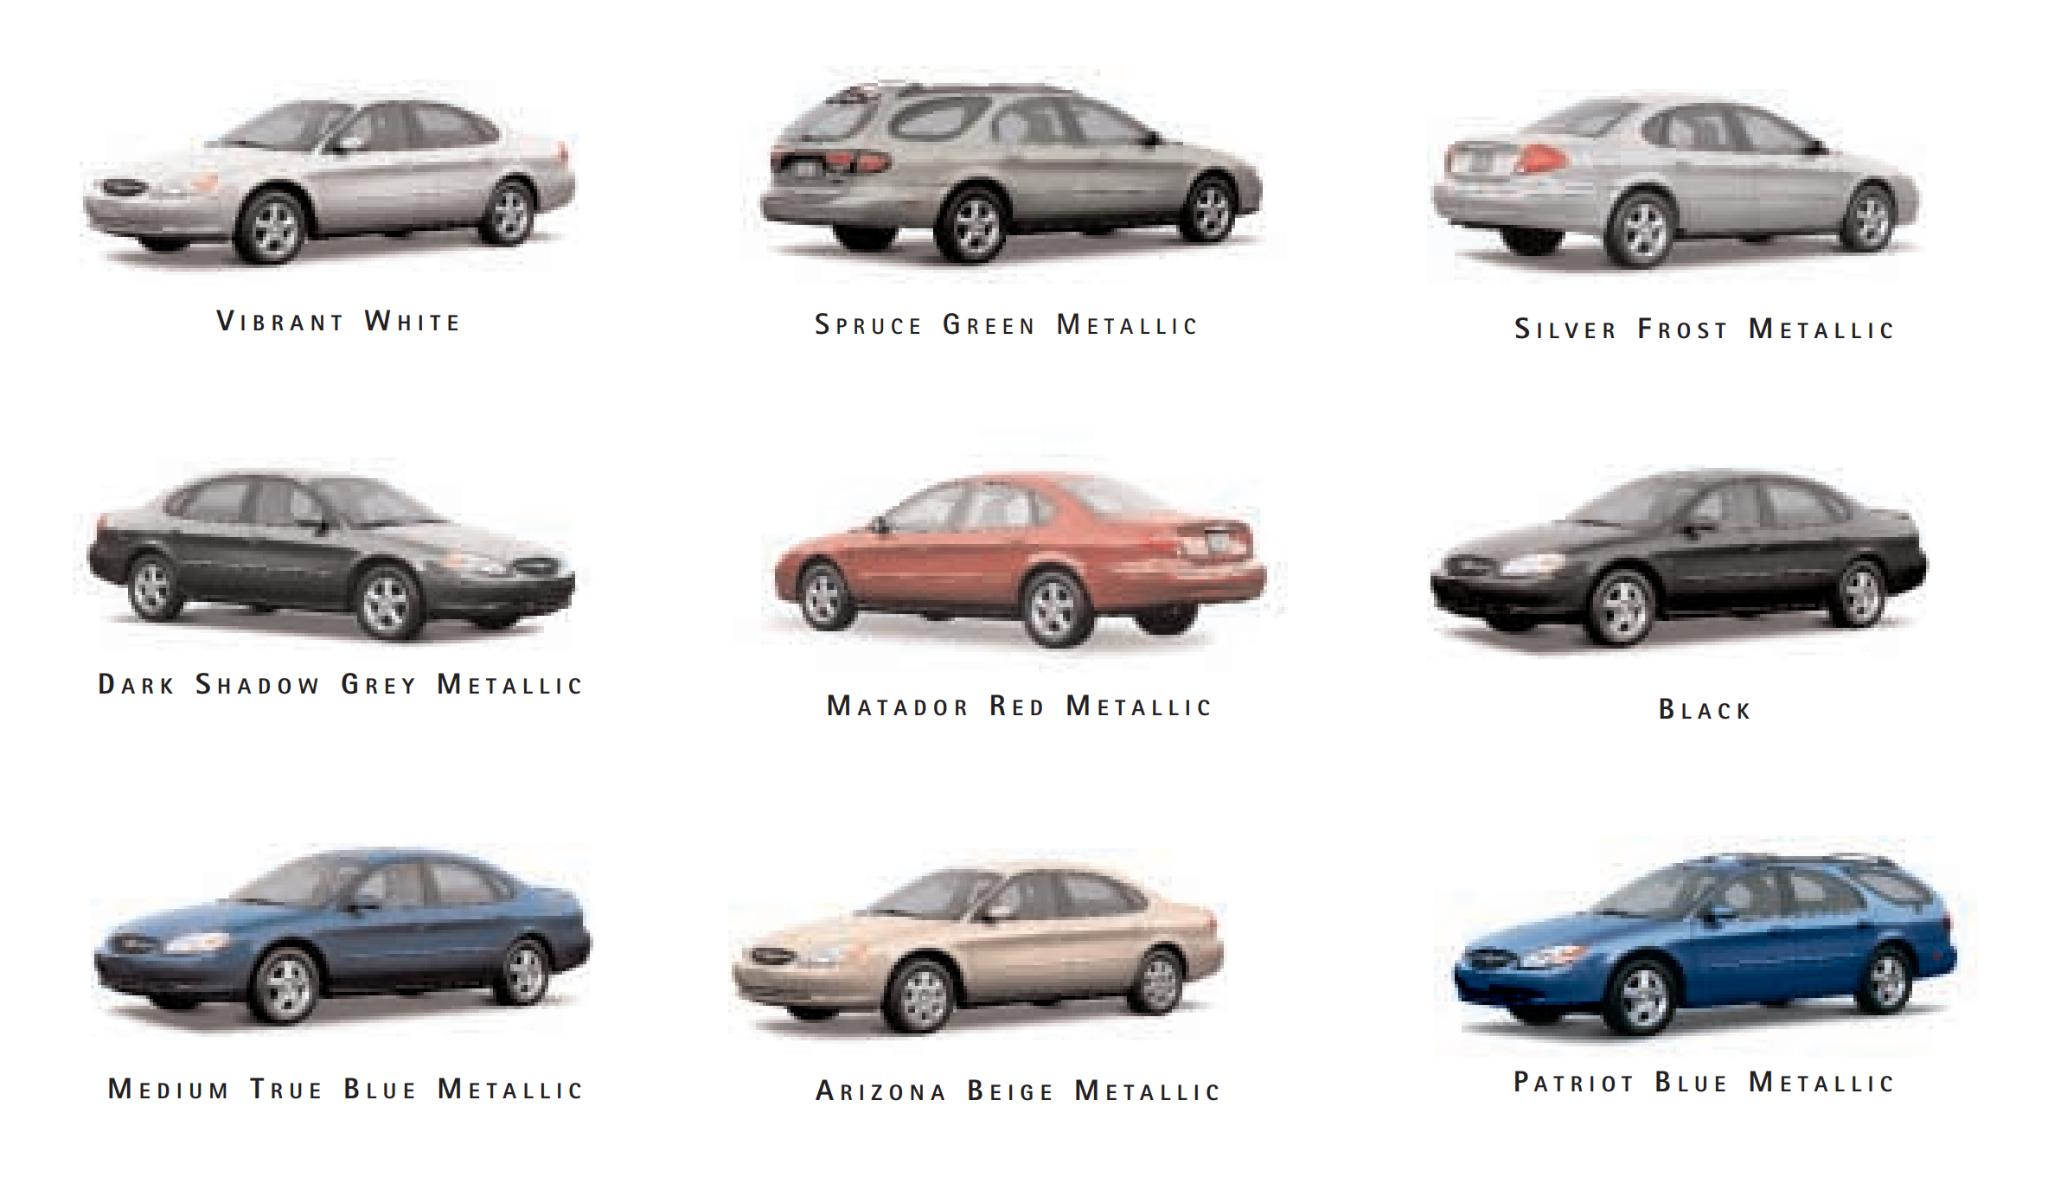 Colors and shade examples that the Ford  Taurus vehicle came in for this year